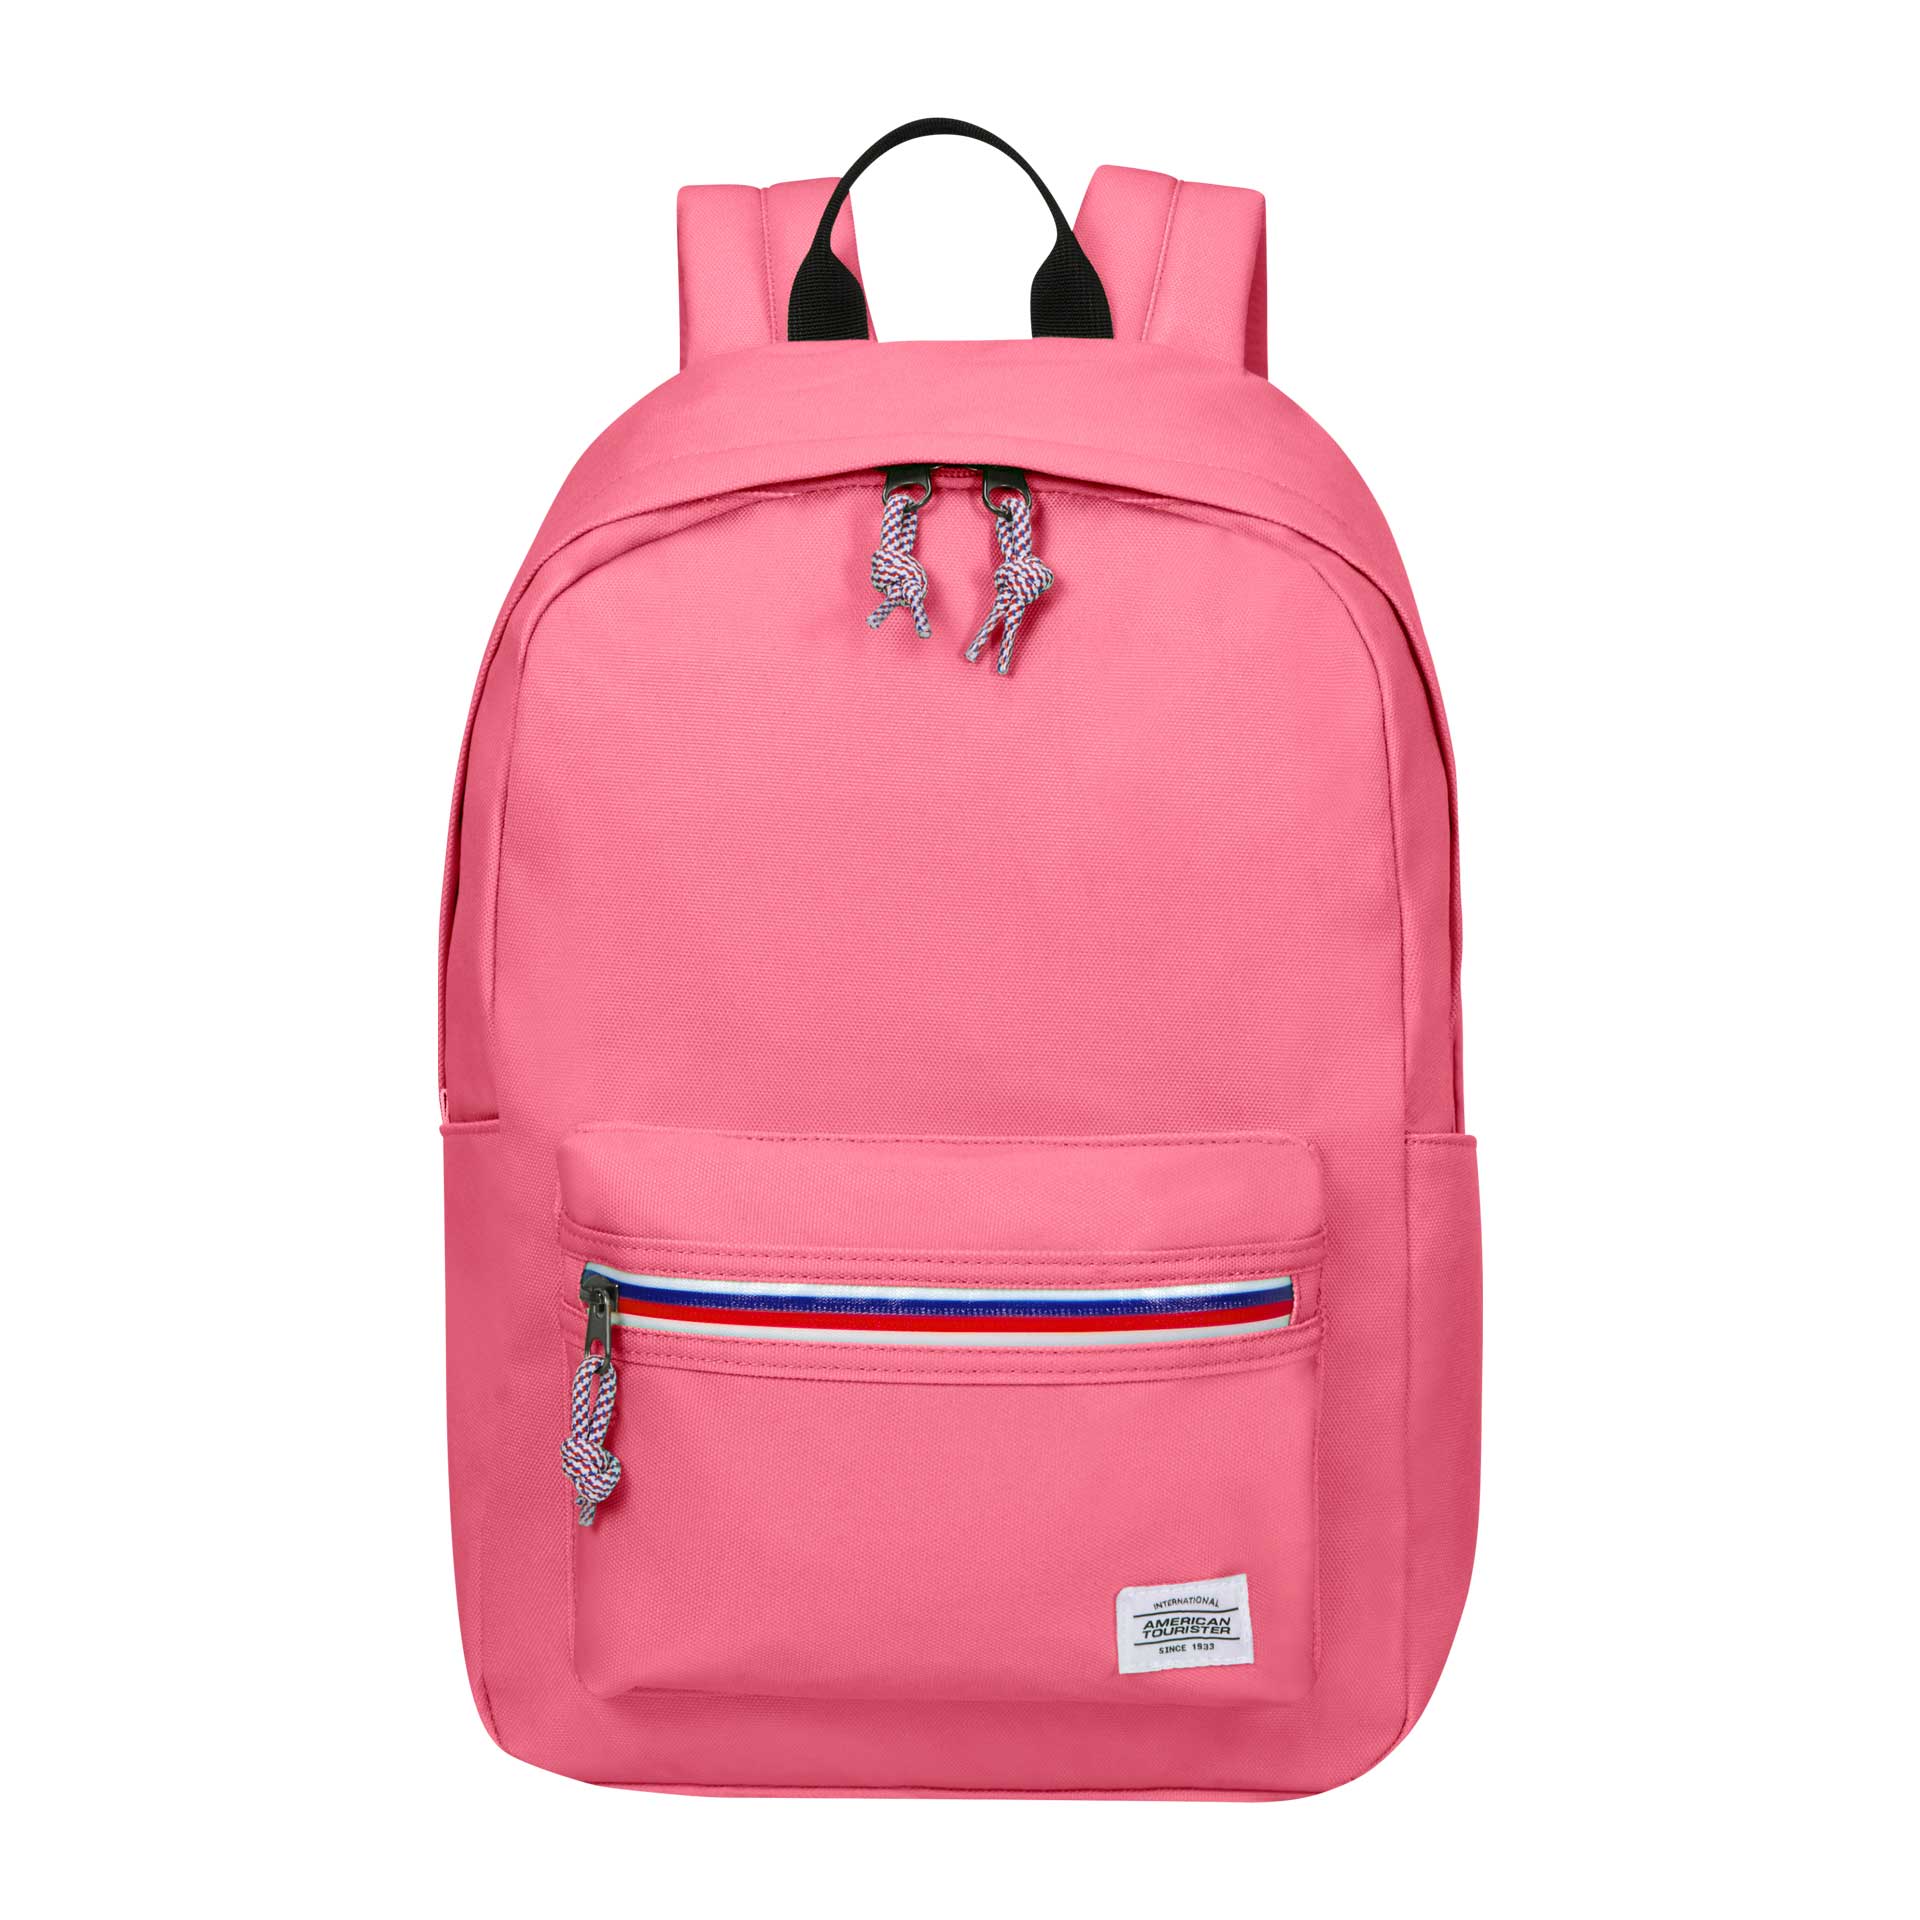 American Tourister UpBeat Rucksack sun kissed coral